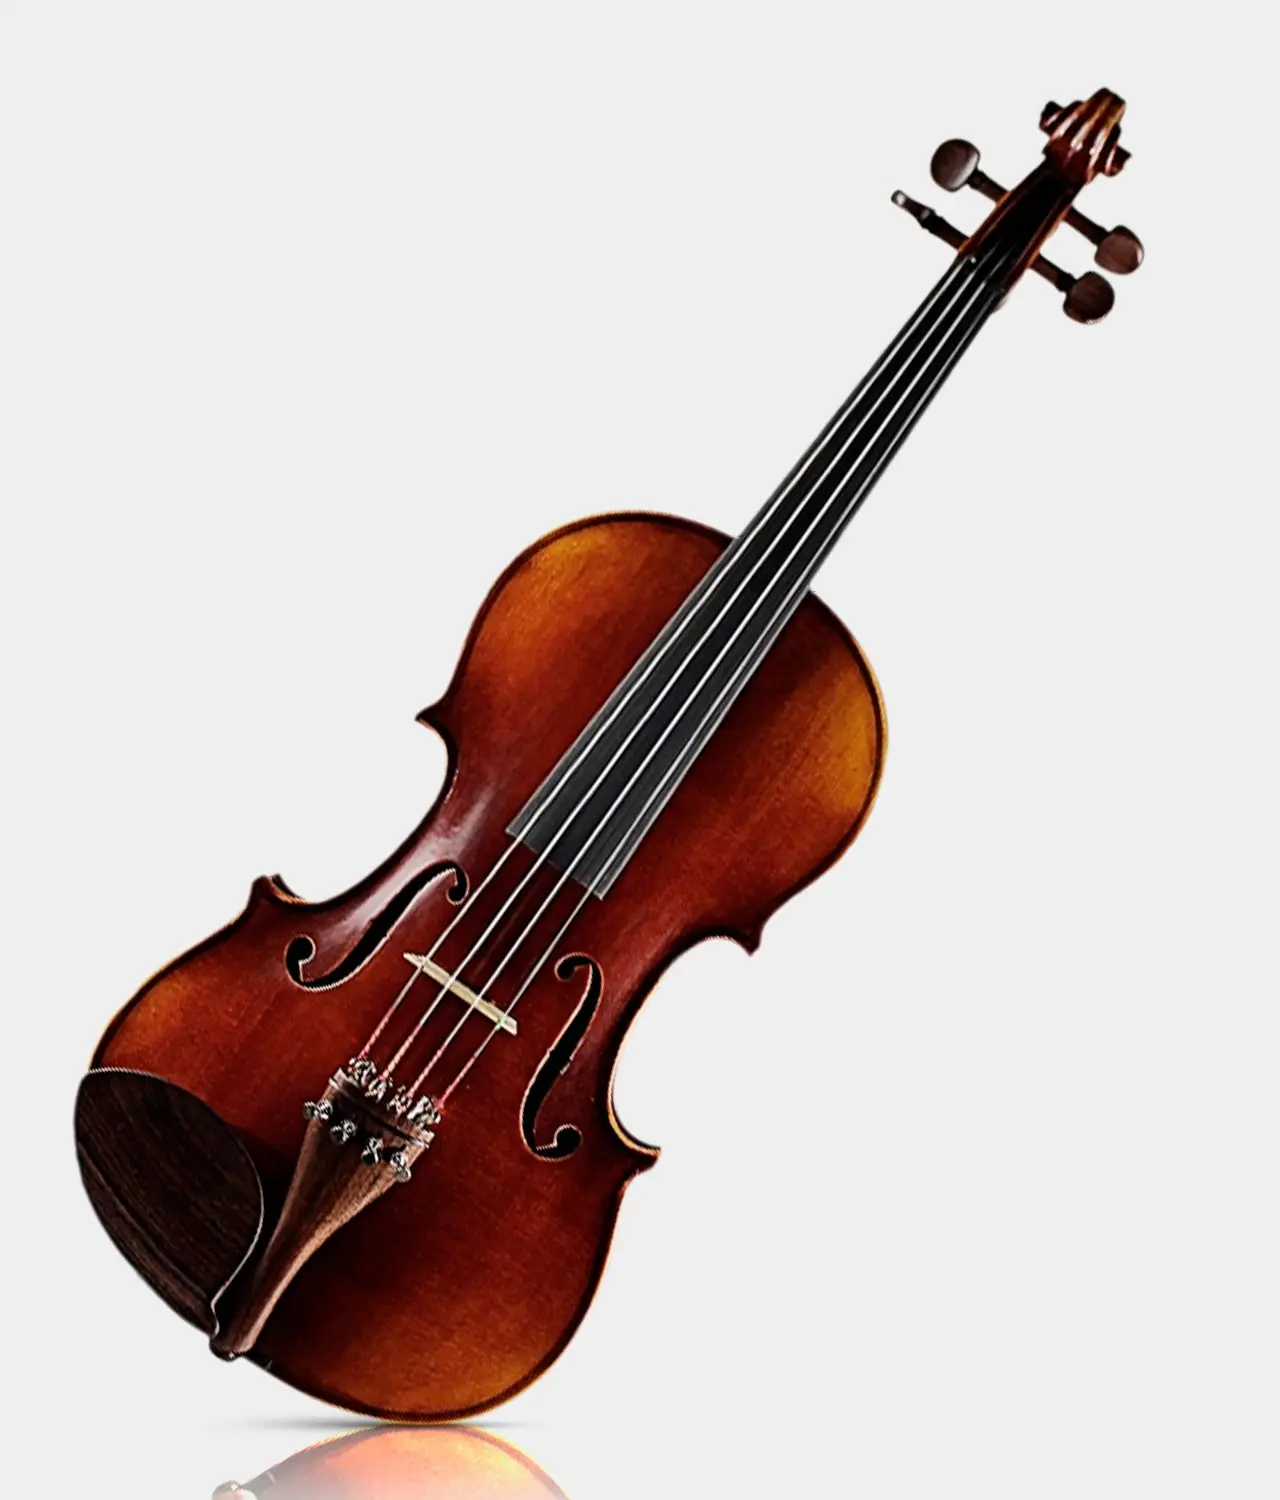 advanced violin - Which violin is best for professionals